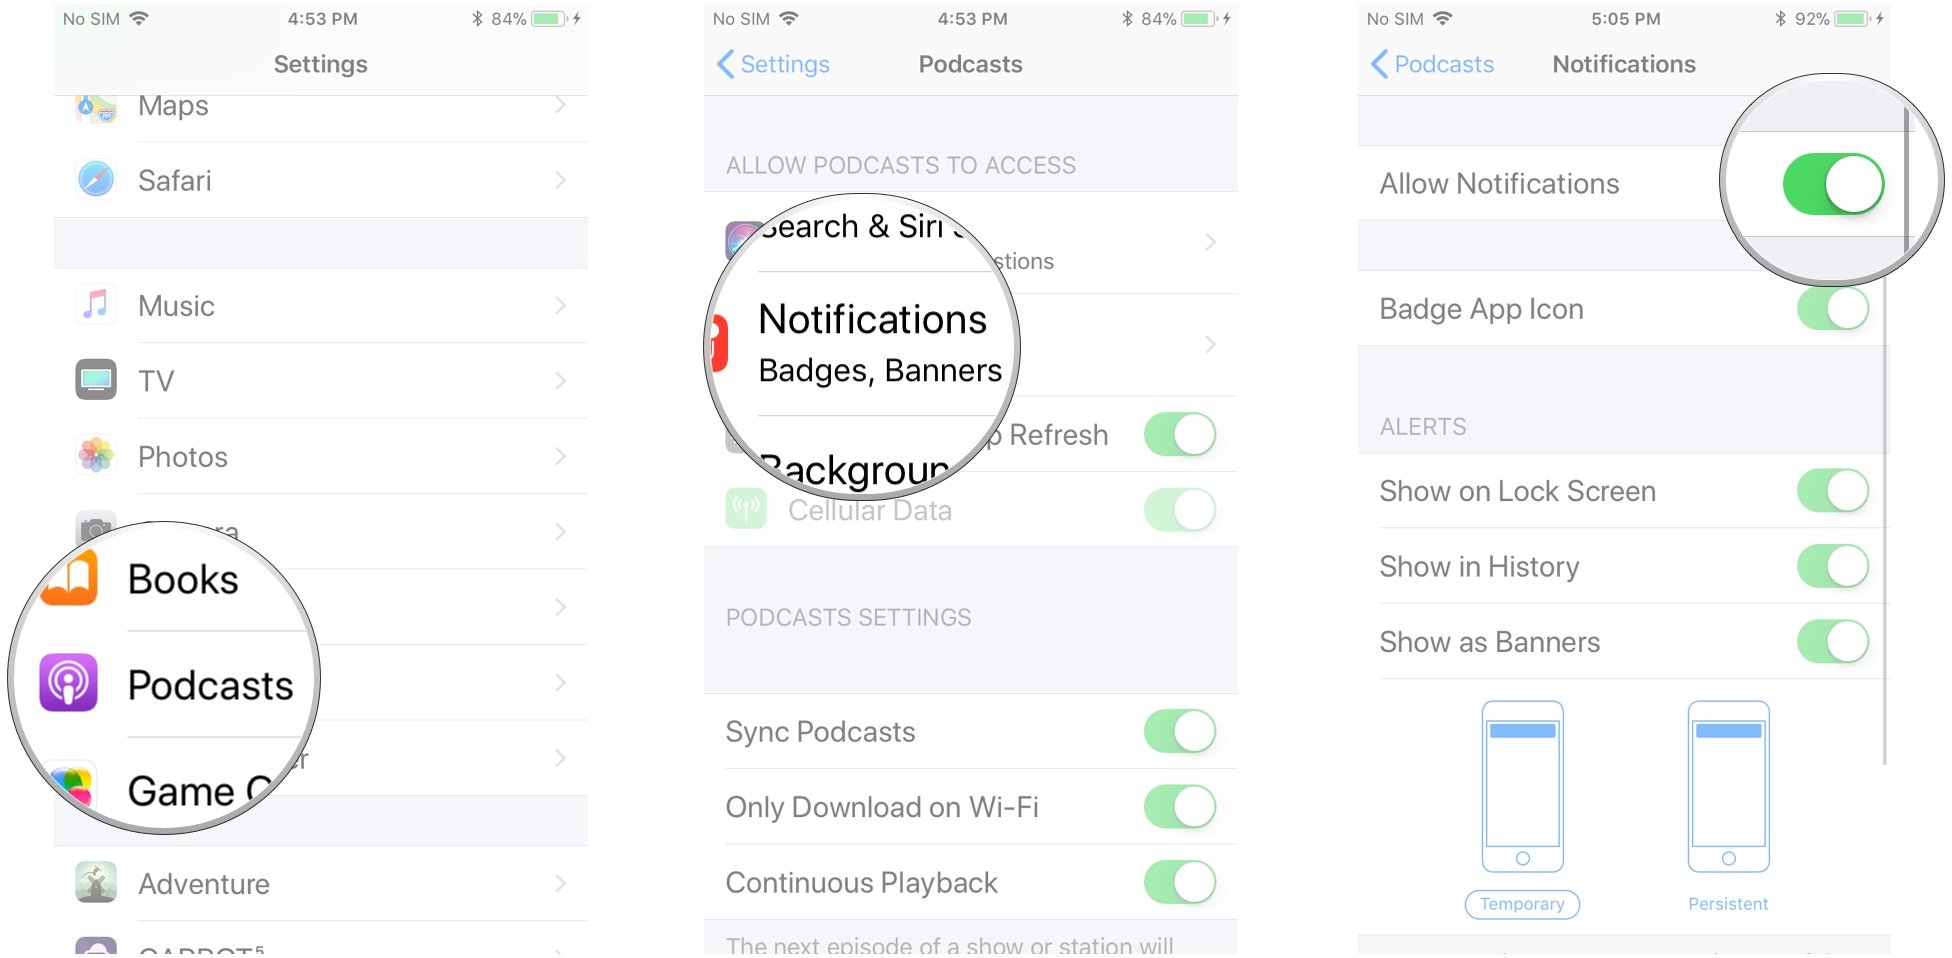 Launch Settings, tap Podcasts, tap Notifications, tap the switch next to Allow Notifications